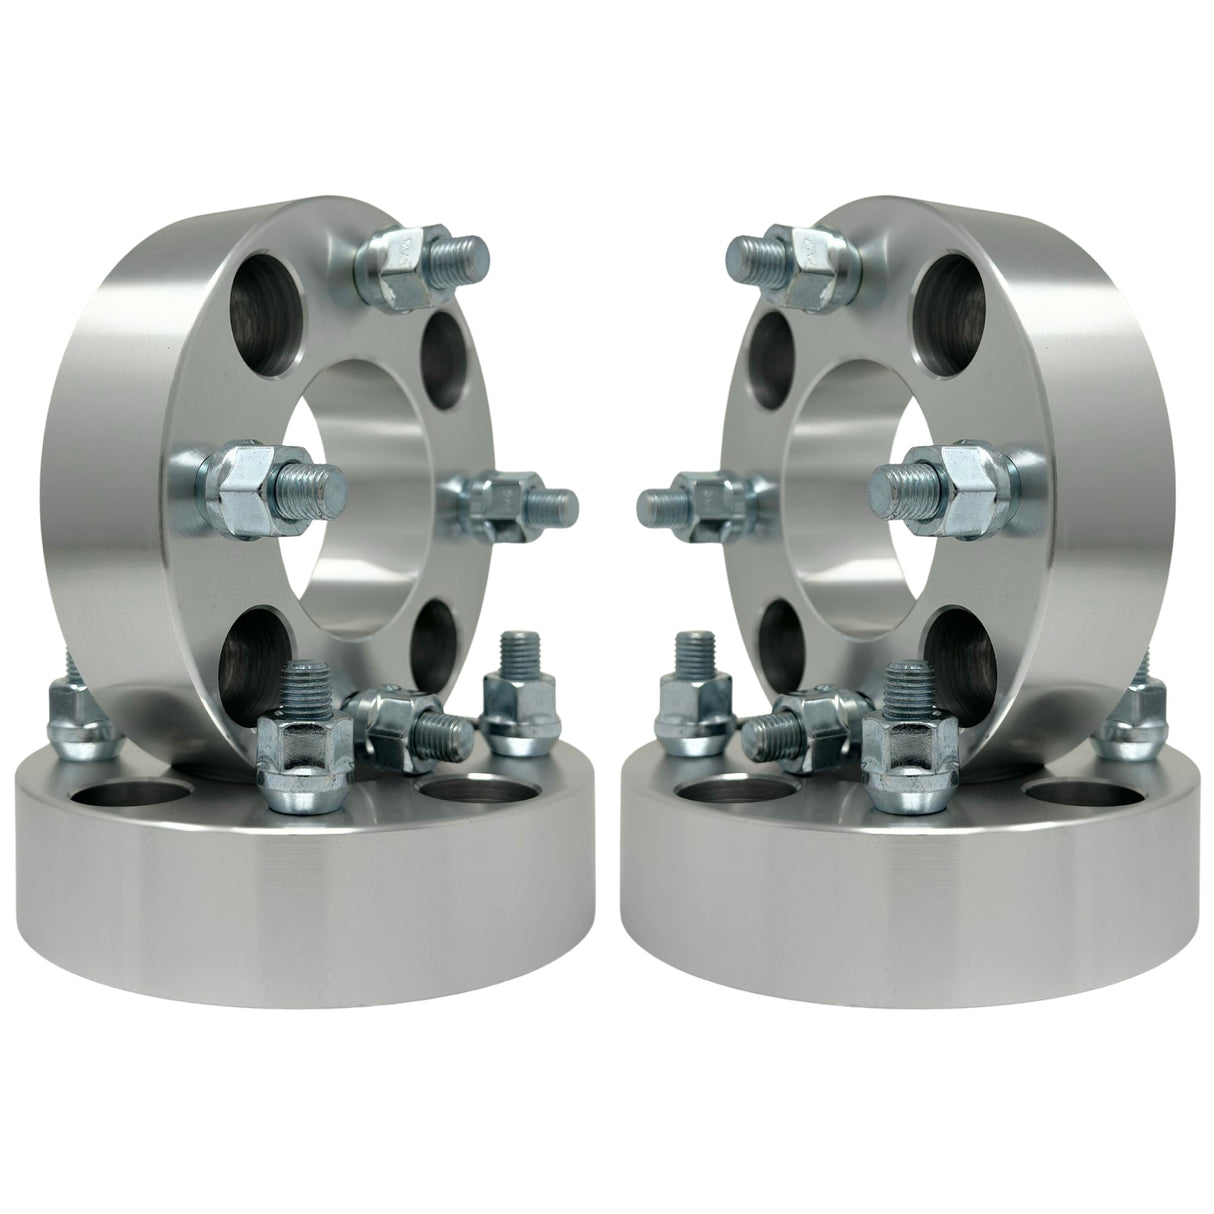 Cushman Truckster 4x3.75 To 4x137 Can Am Maverick X3 1000 Wheel Adapters / Spacers | 4x95 to 4x137 Wheel Spacers | 1" Inch or 1.25" Inch or 1.5" Inch or 2 Inch Thick (25mm - 50mm) 1/2-20 Studs & Lug Nuts 71mm Center Bore For All 4x3.75 Hub Clearance